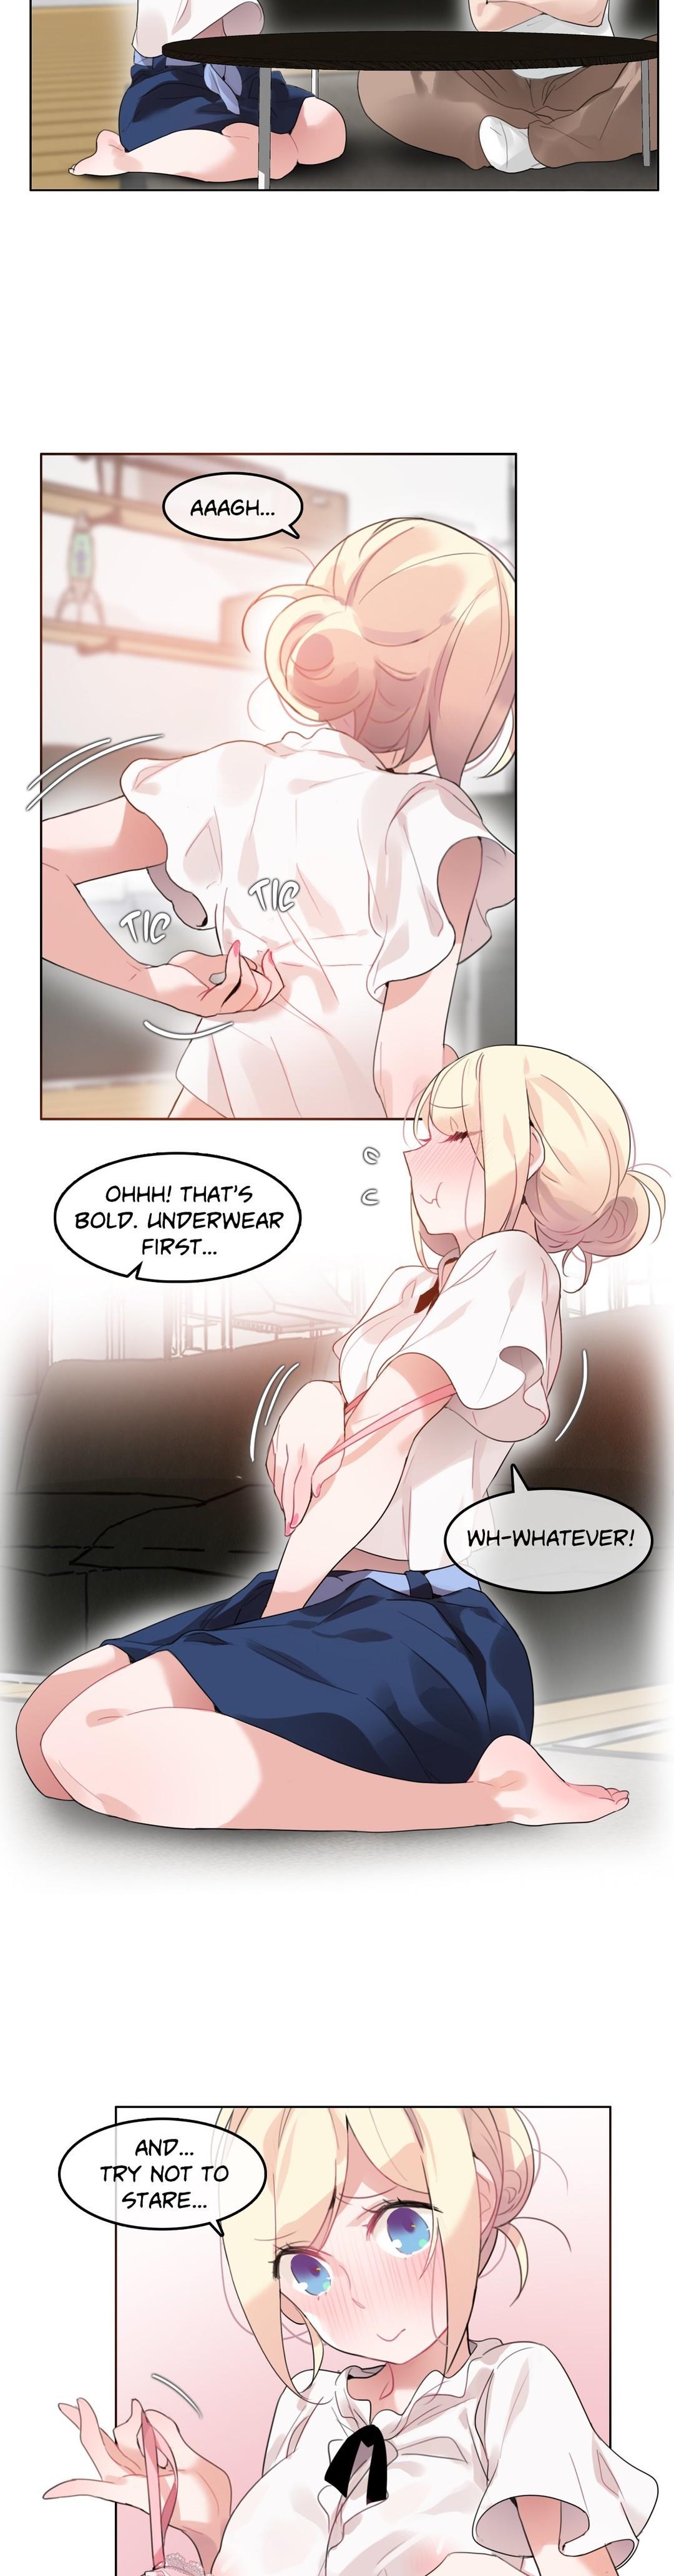 A Pervert's Daily Life Ch. 1-34 759